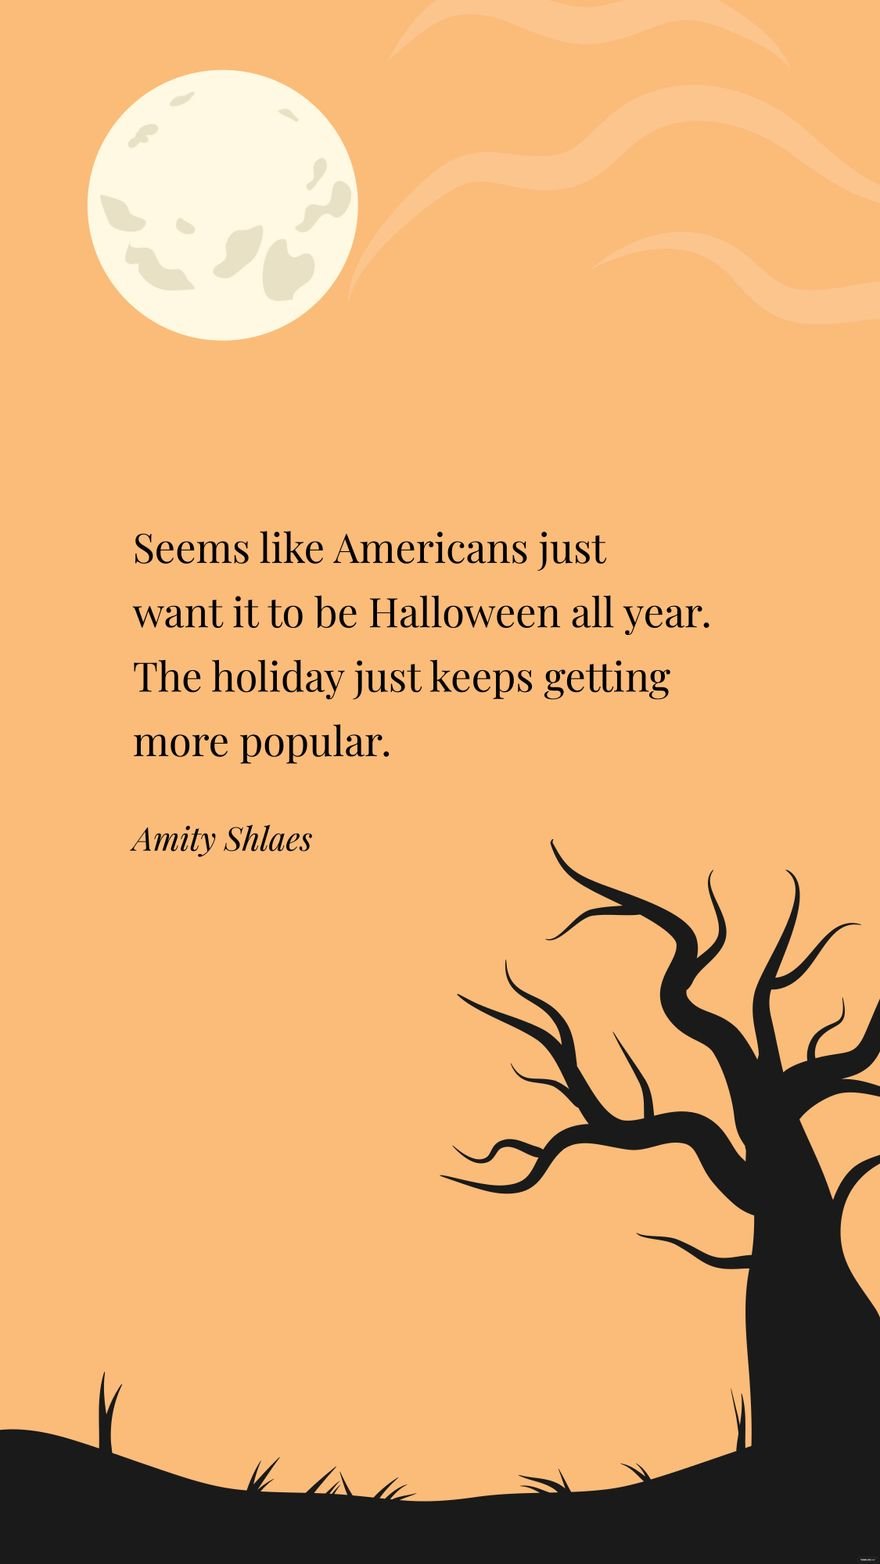  Amity Shlaes- Seems like Americans just want it to be Halloween all year. The holiday just keeps getting more popular. 